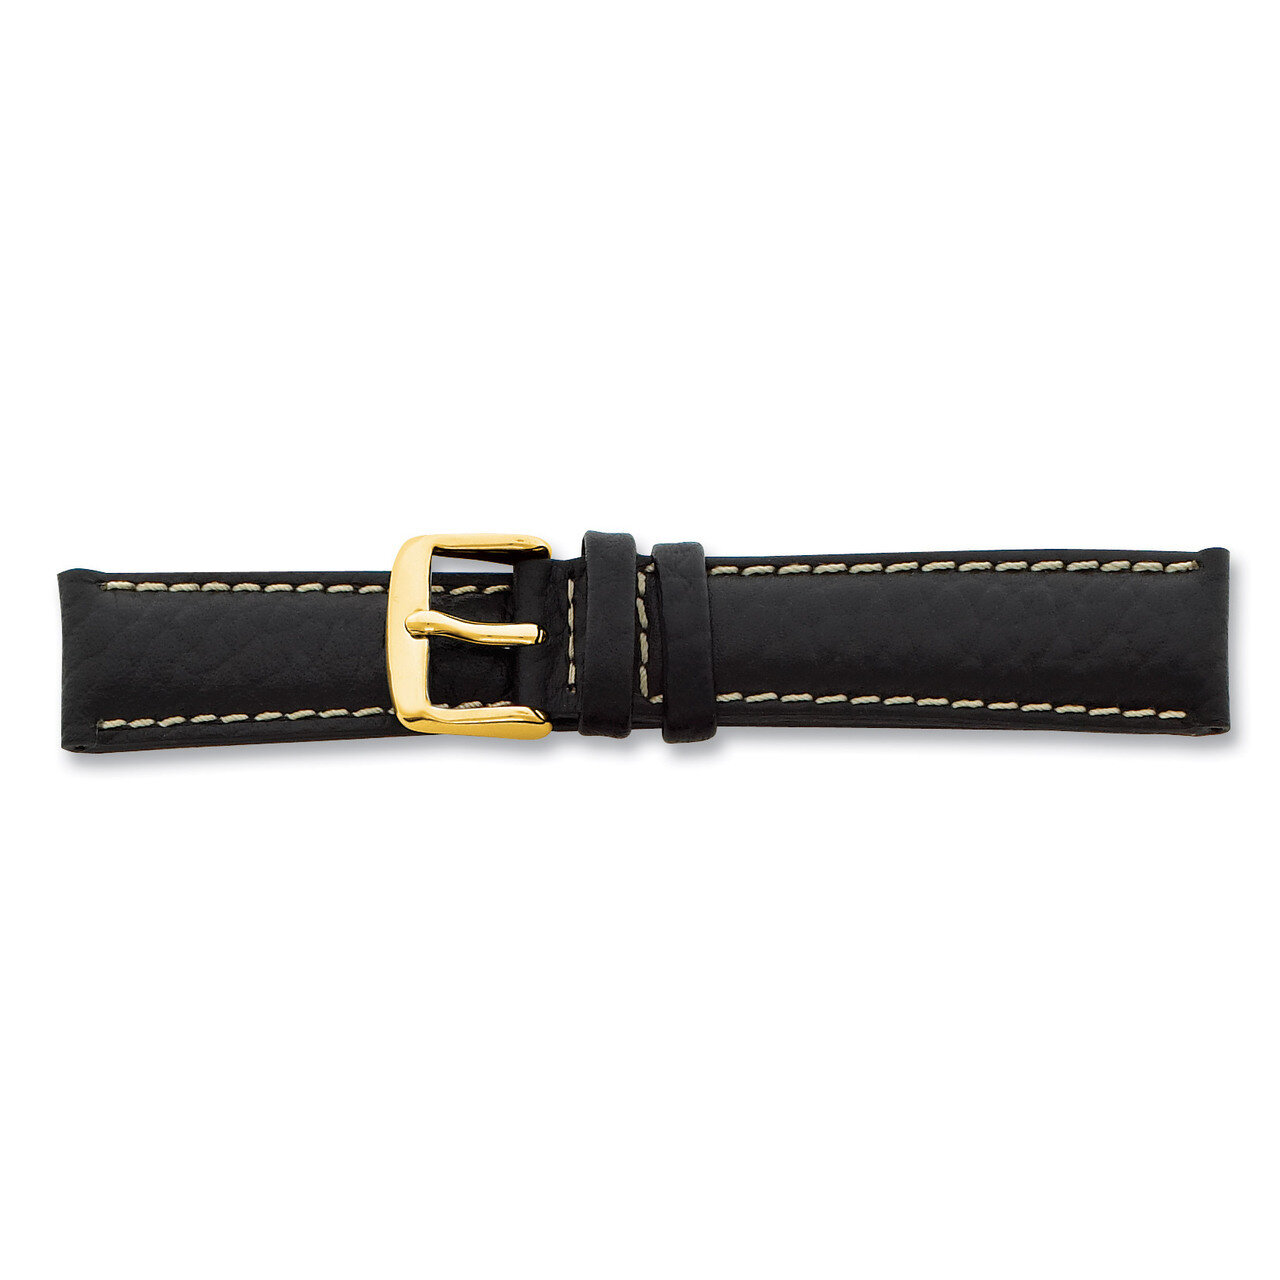 18mm Long Black Leather White Stitch Buckle Watch Band 8.5 Inch Gold-tone BAY99L-18